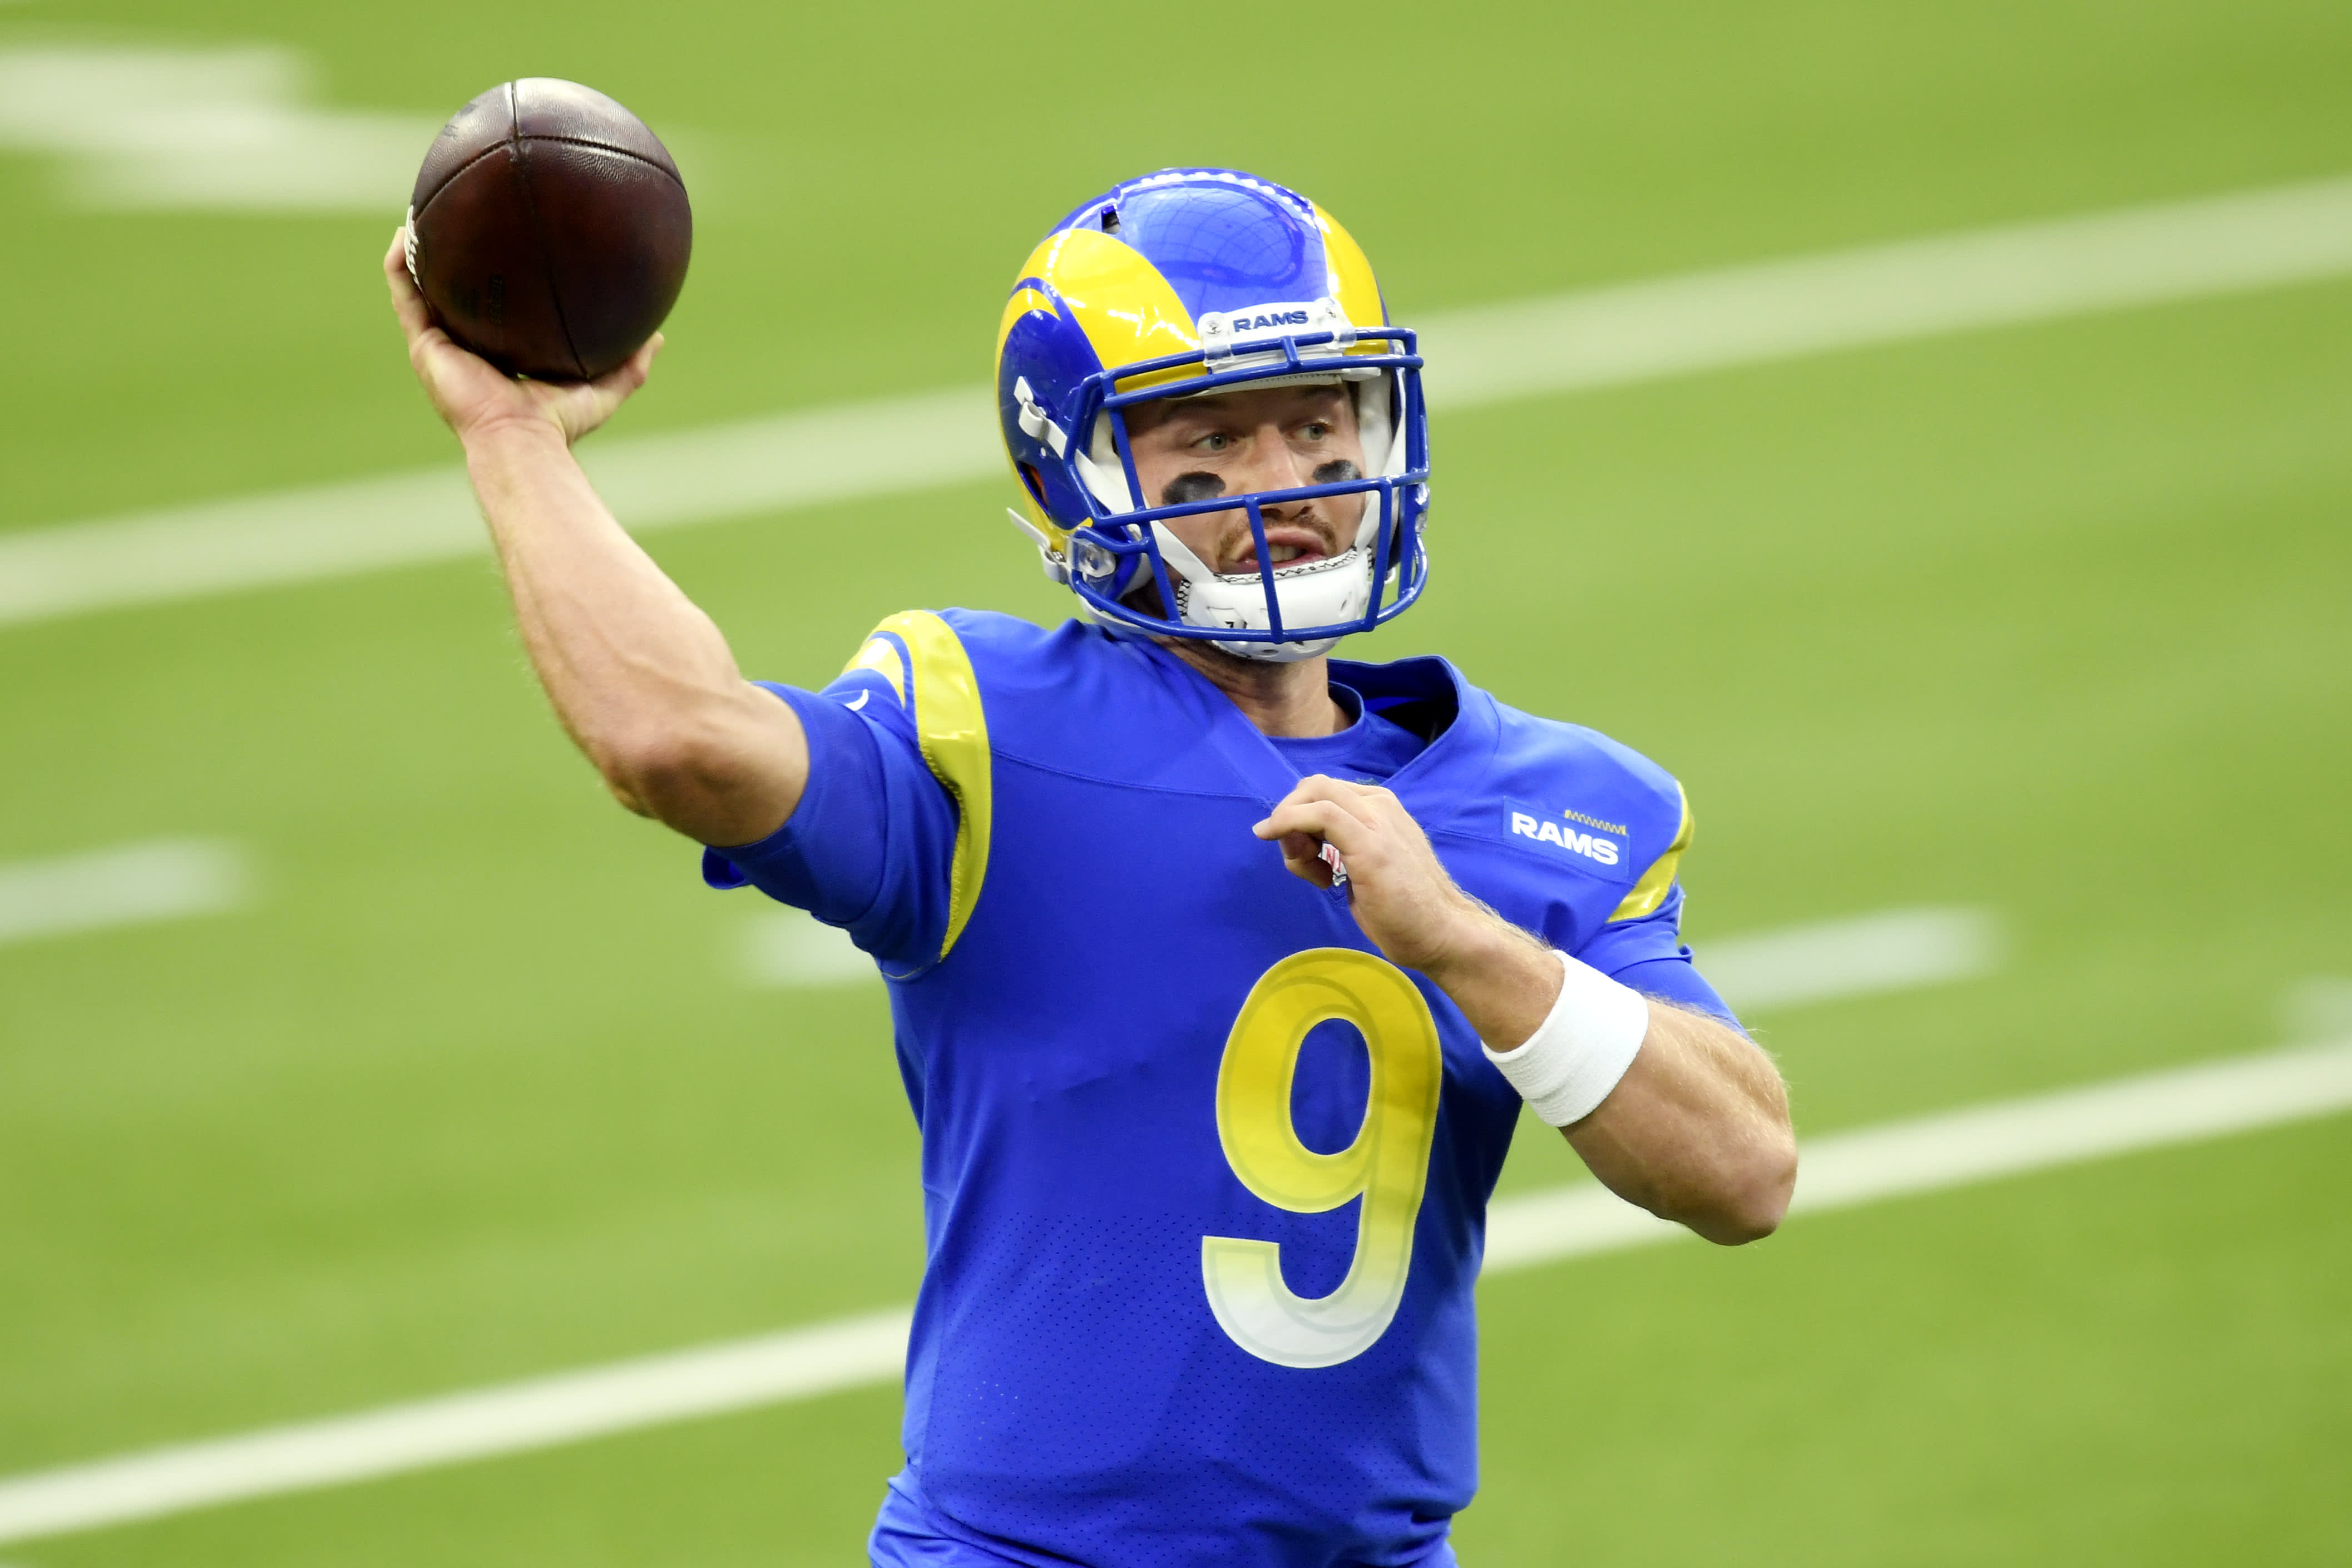 Once undrafted QB John Wolford helped Rams reach playoffs